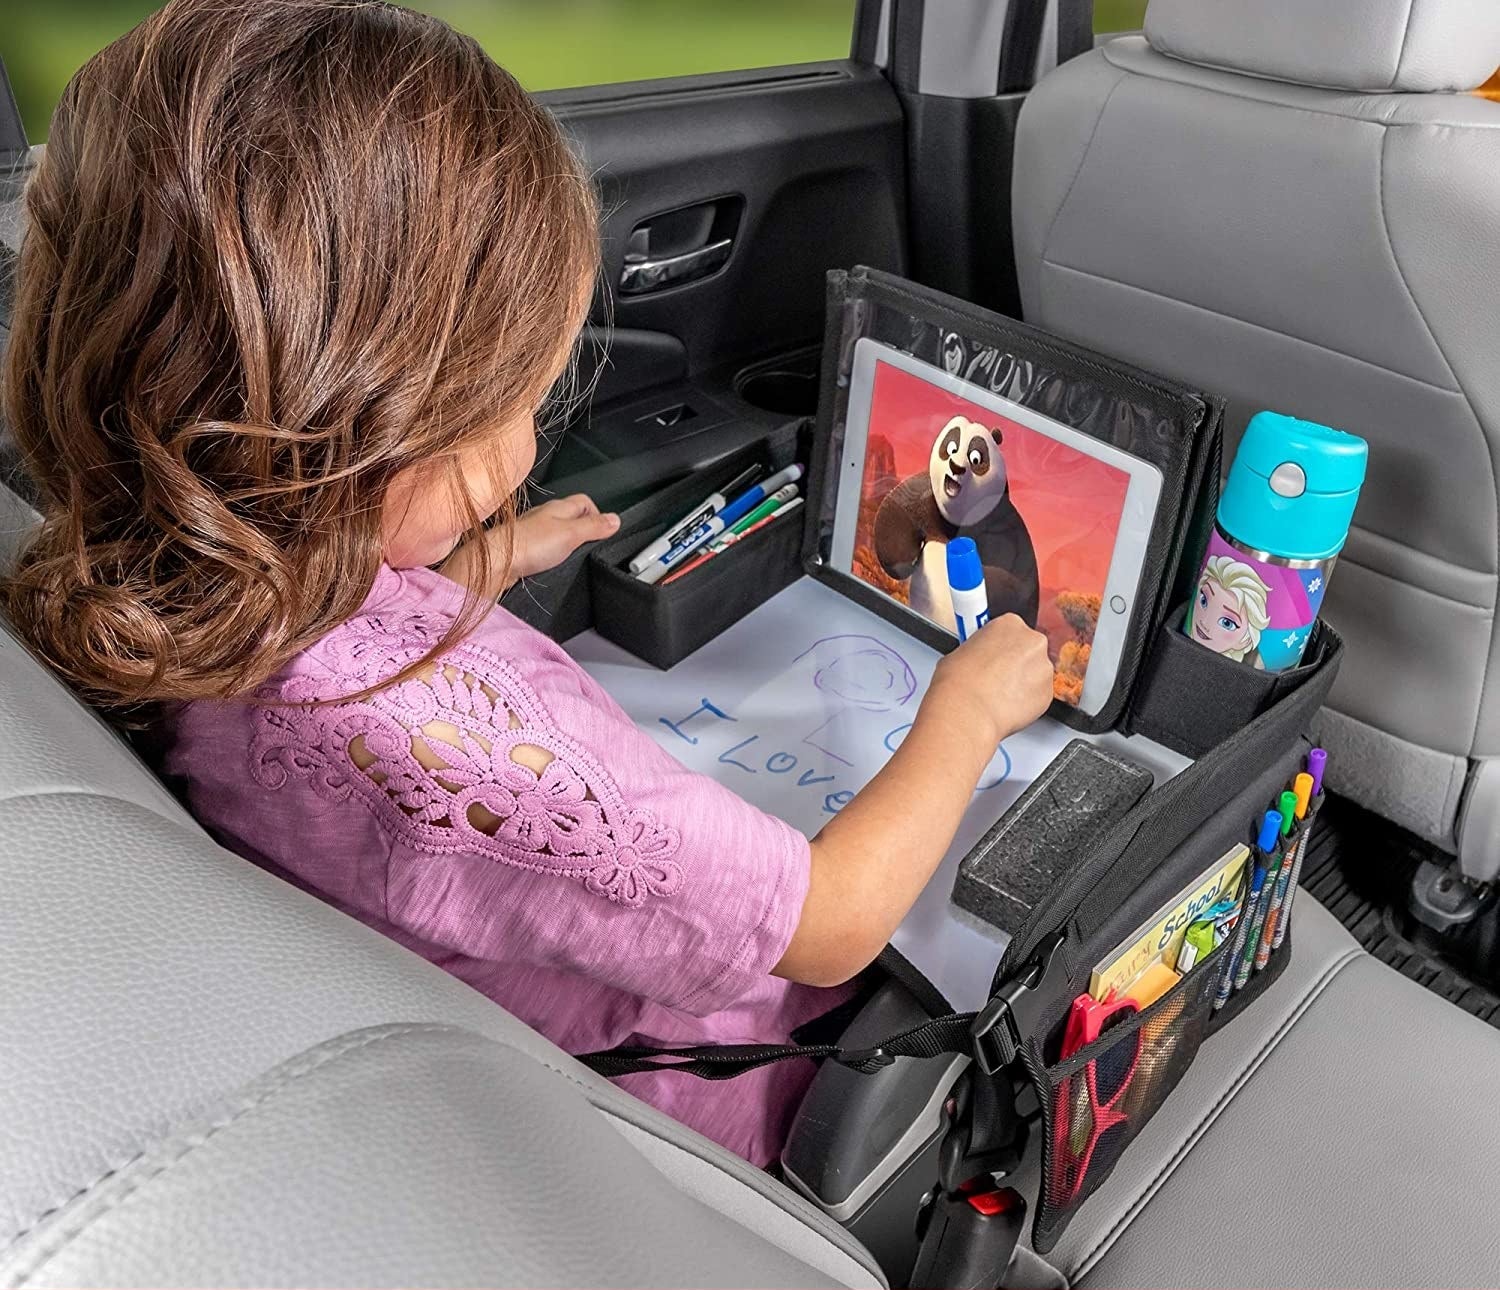 A model watching the tablet and coloring on the table in a car